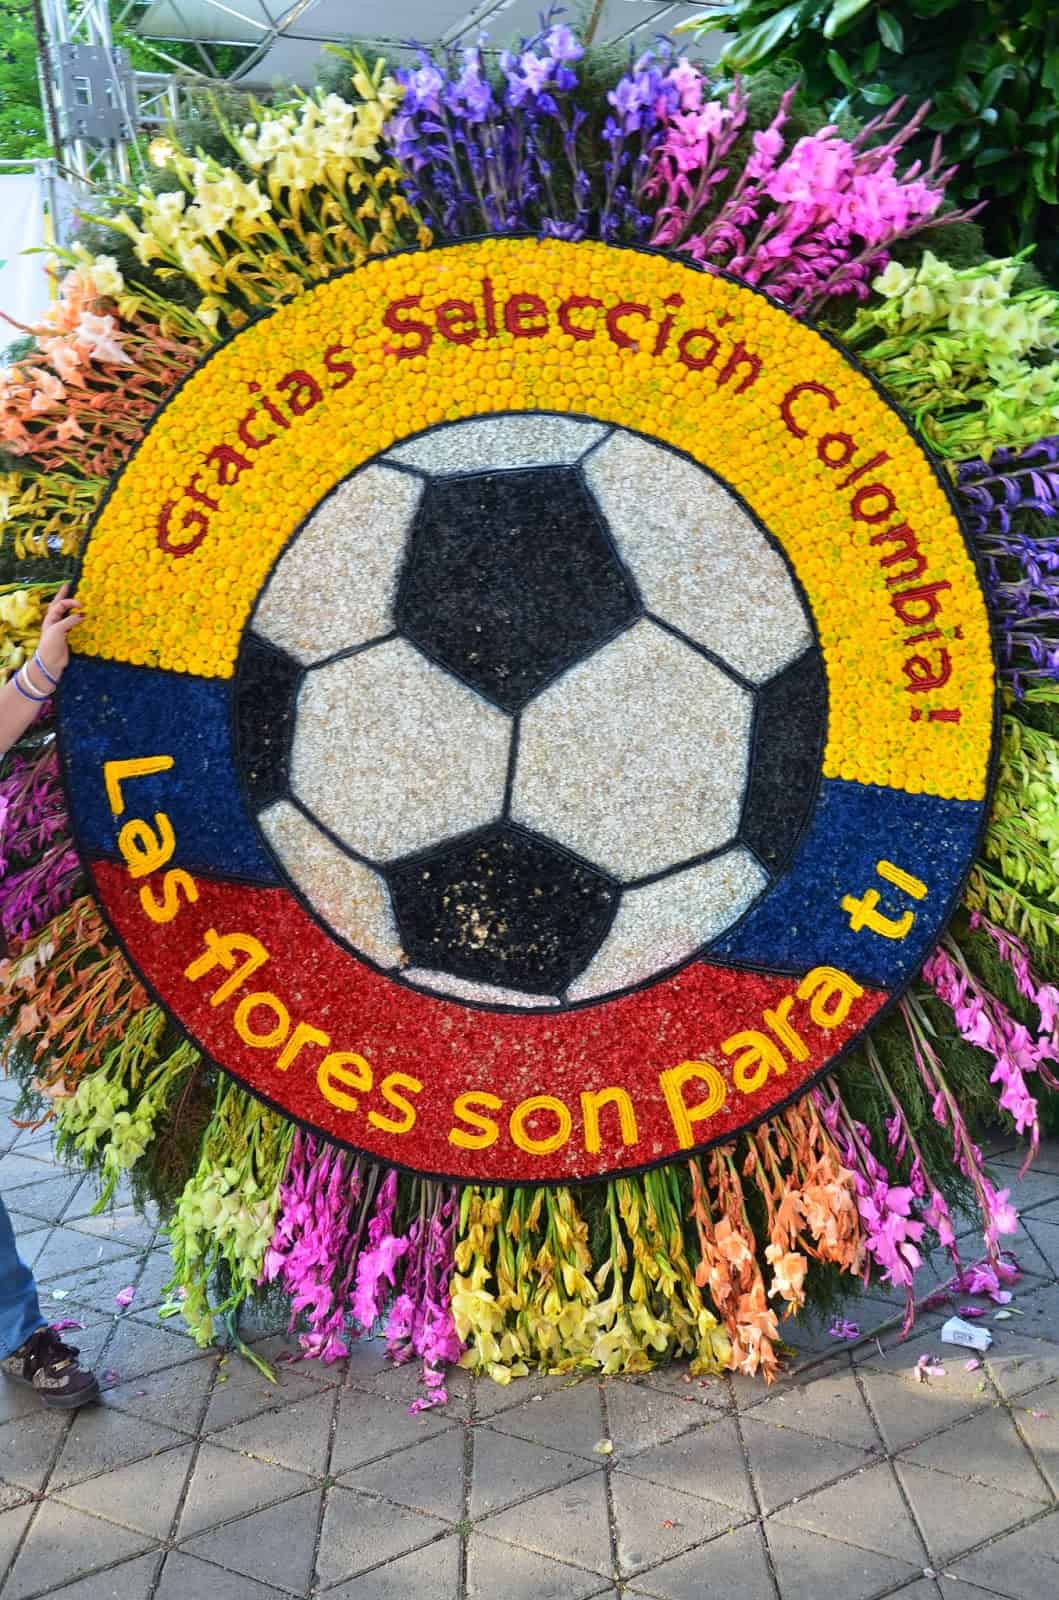 Colombian football team arrangement at the Craft Fair at the Medellín Botanical Garden in the Flower Festival, Medellín, Antioquia, Colombia